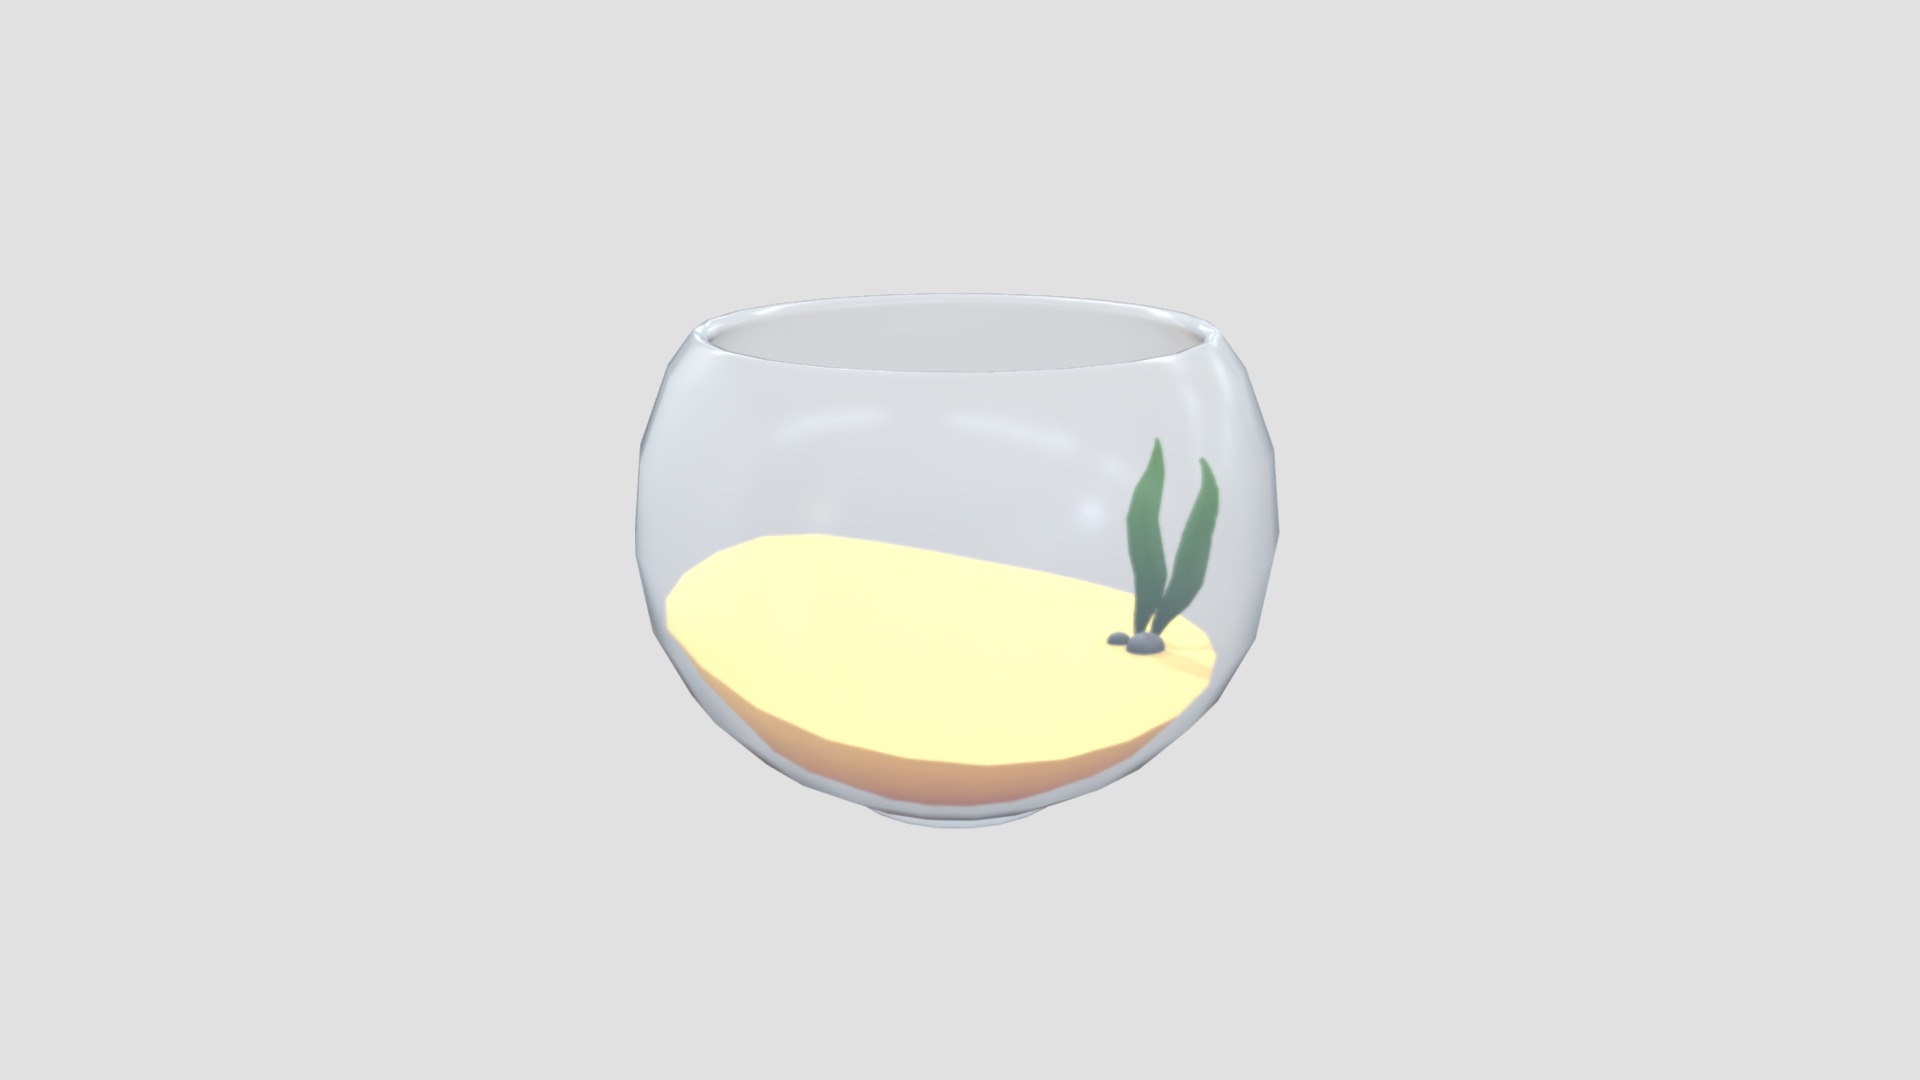 3D model Fish Bowl - This is a 3D model of the Fish Bowl. The 3D model is about a glass with a yellow liquid in it.